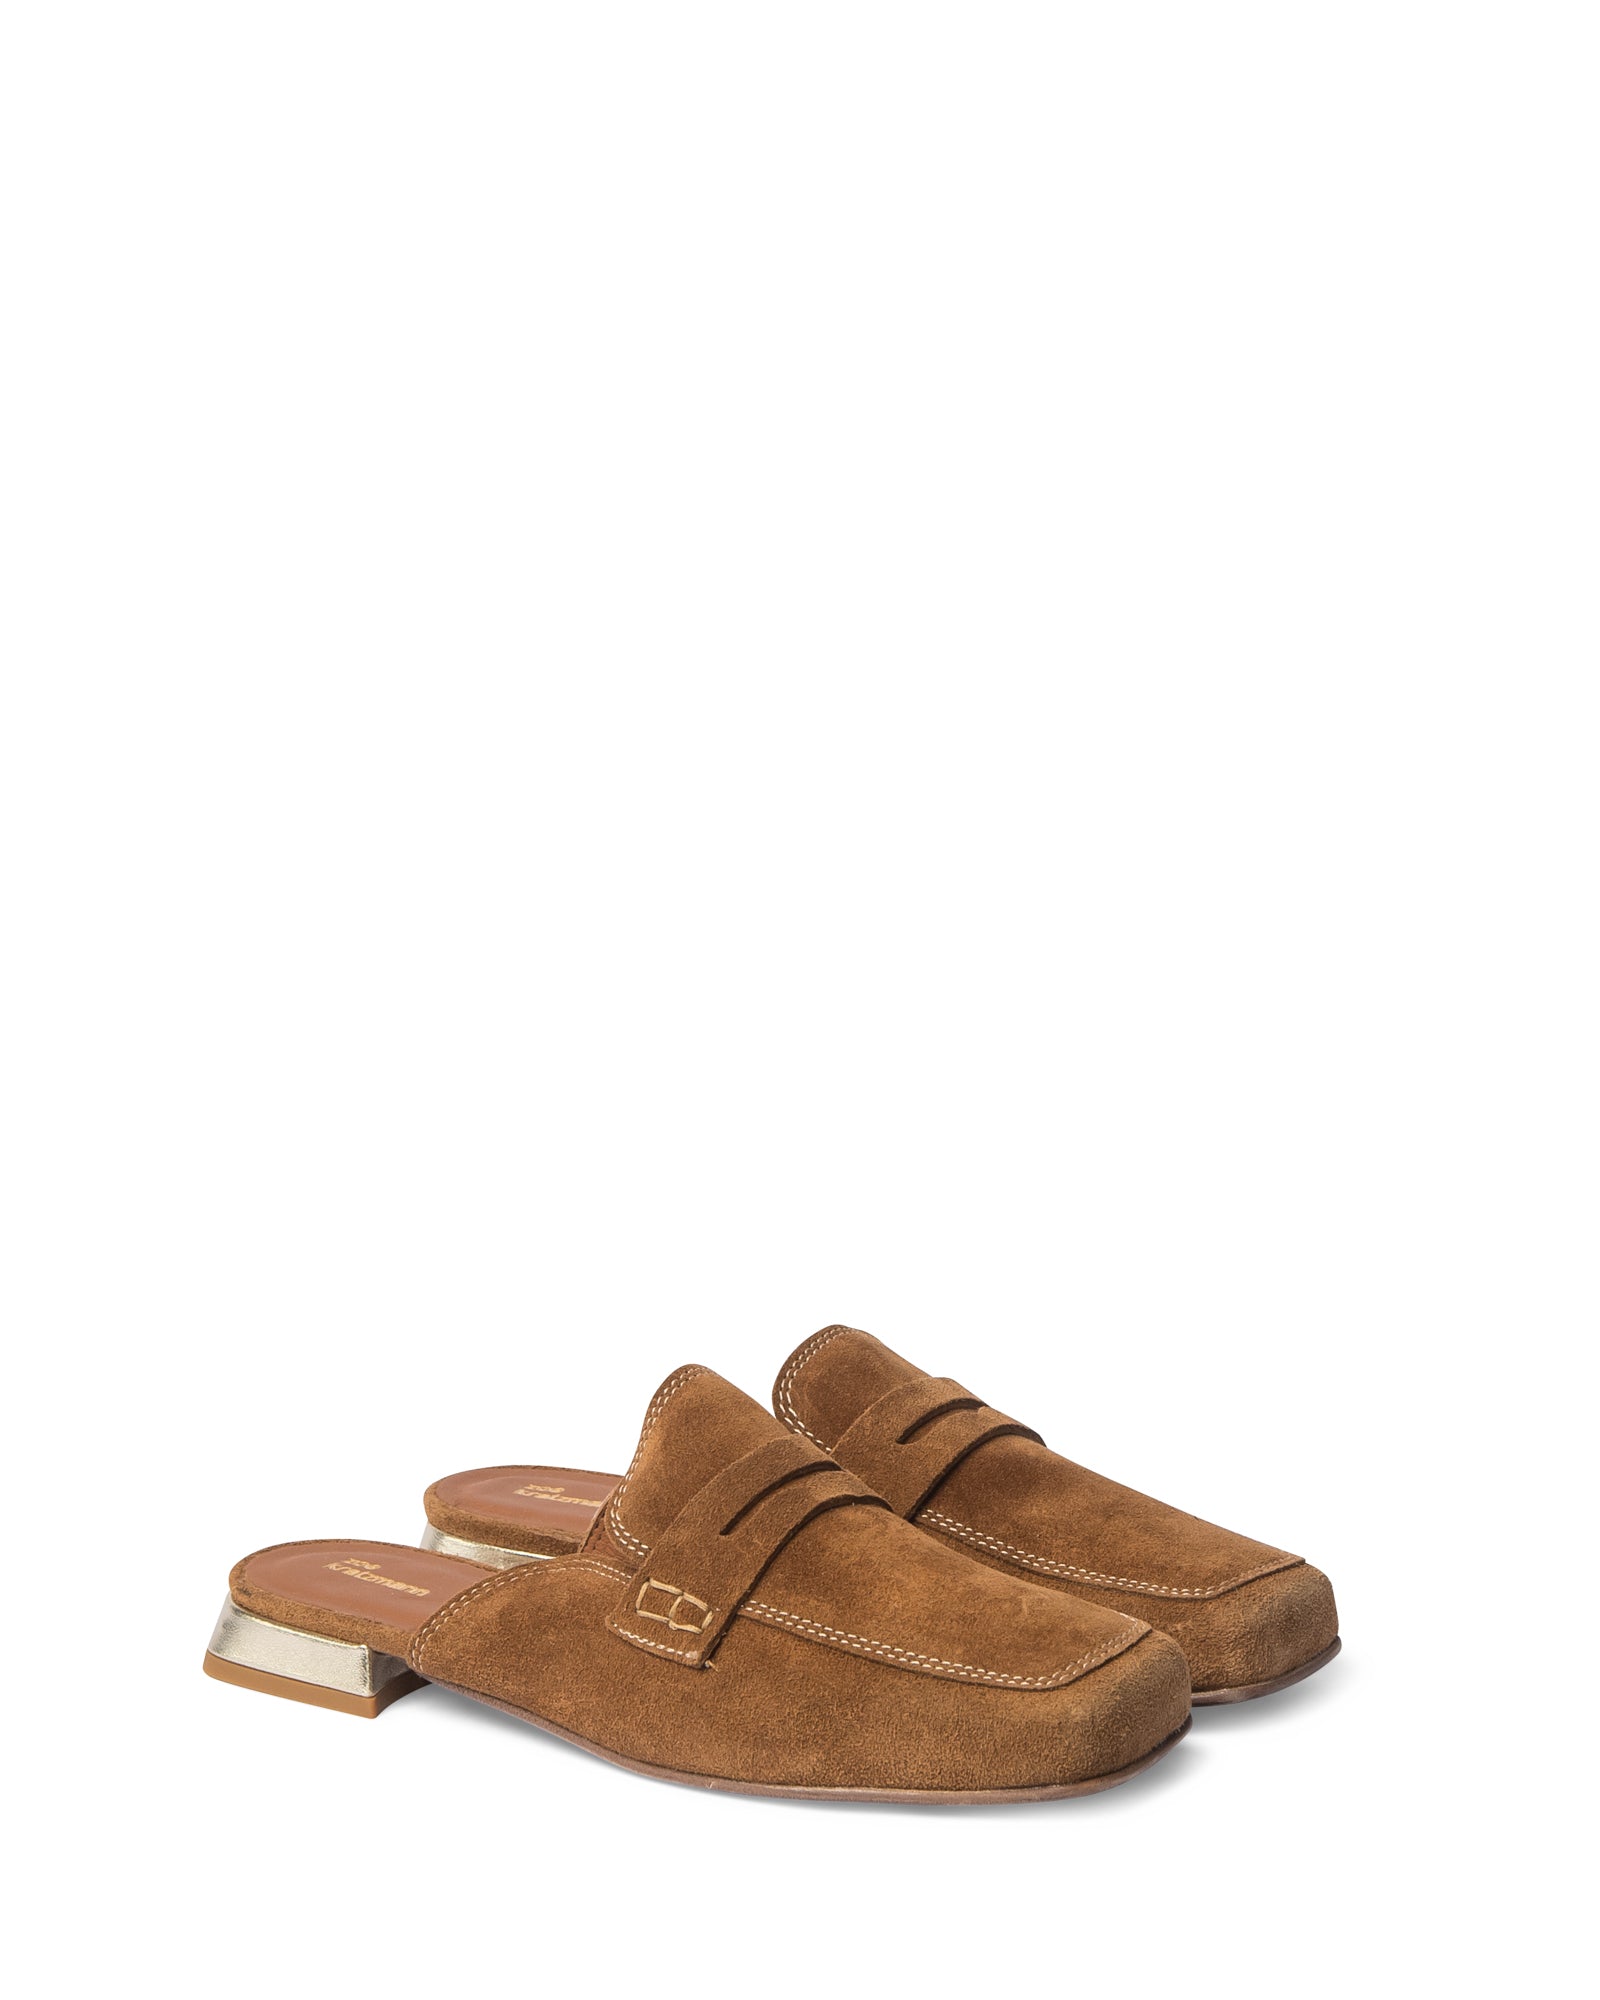 unlock loafer - whiskey suede